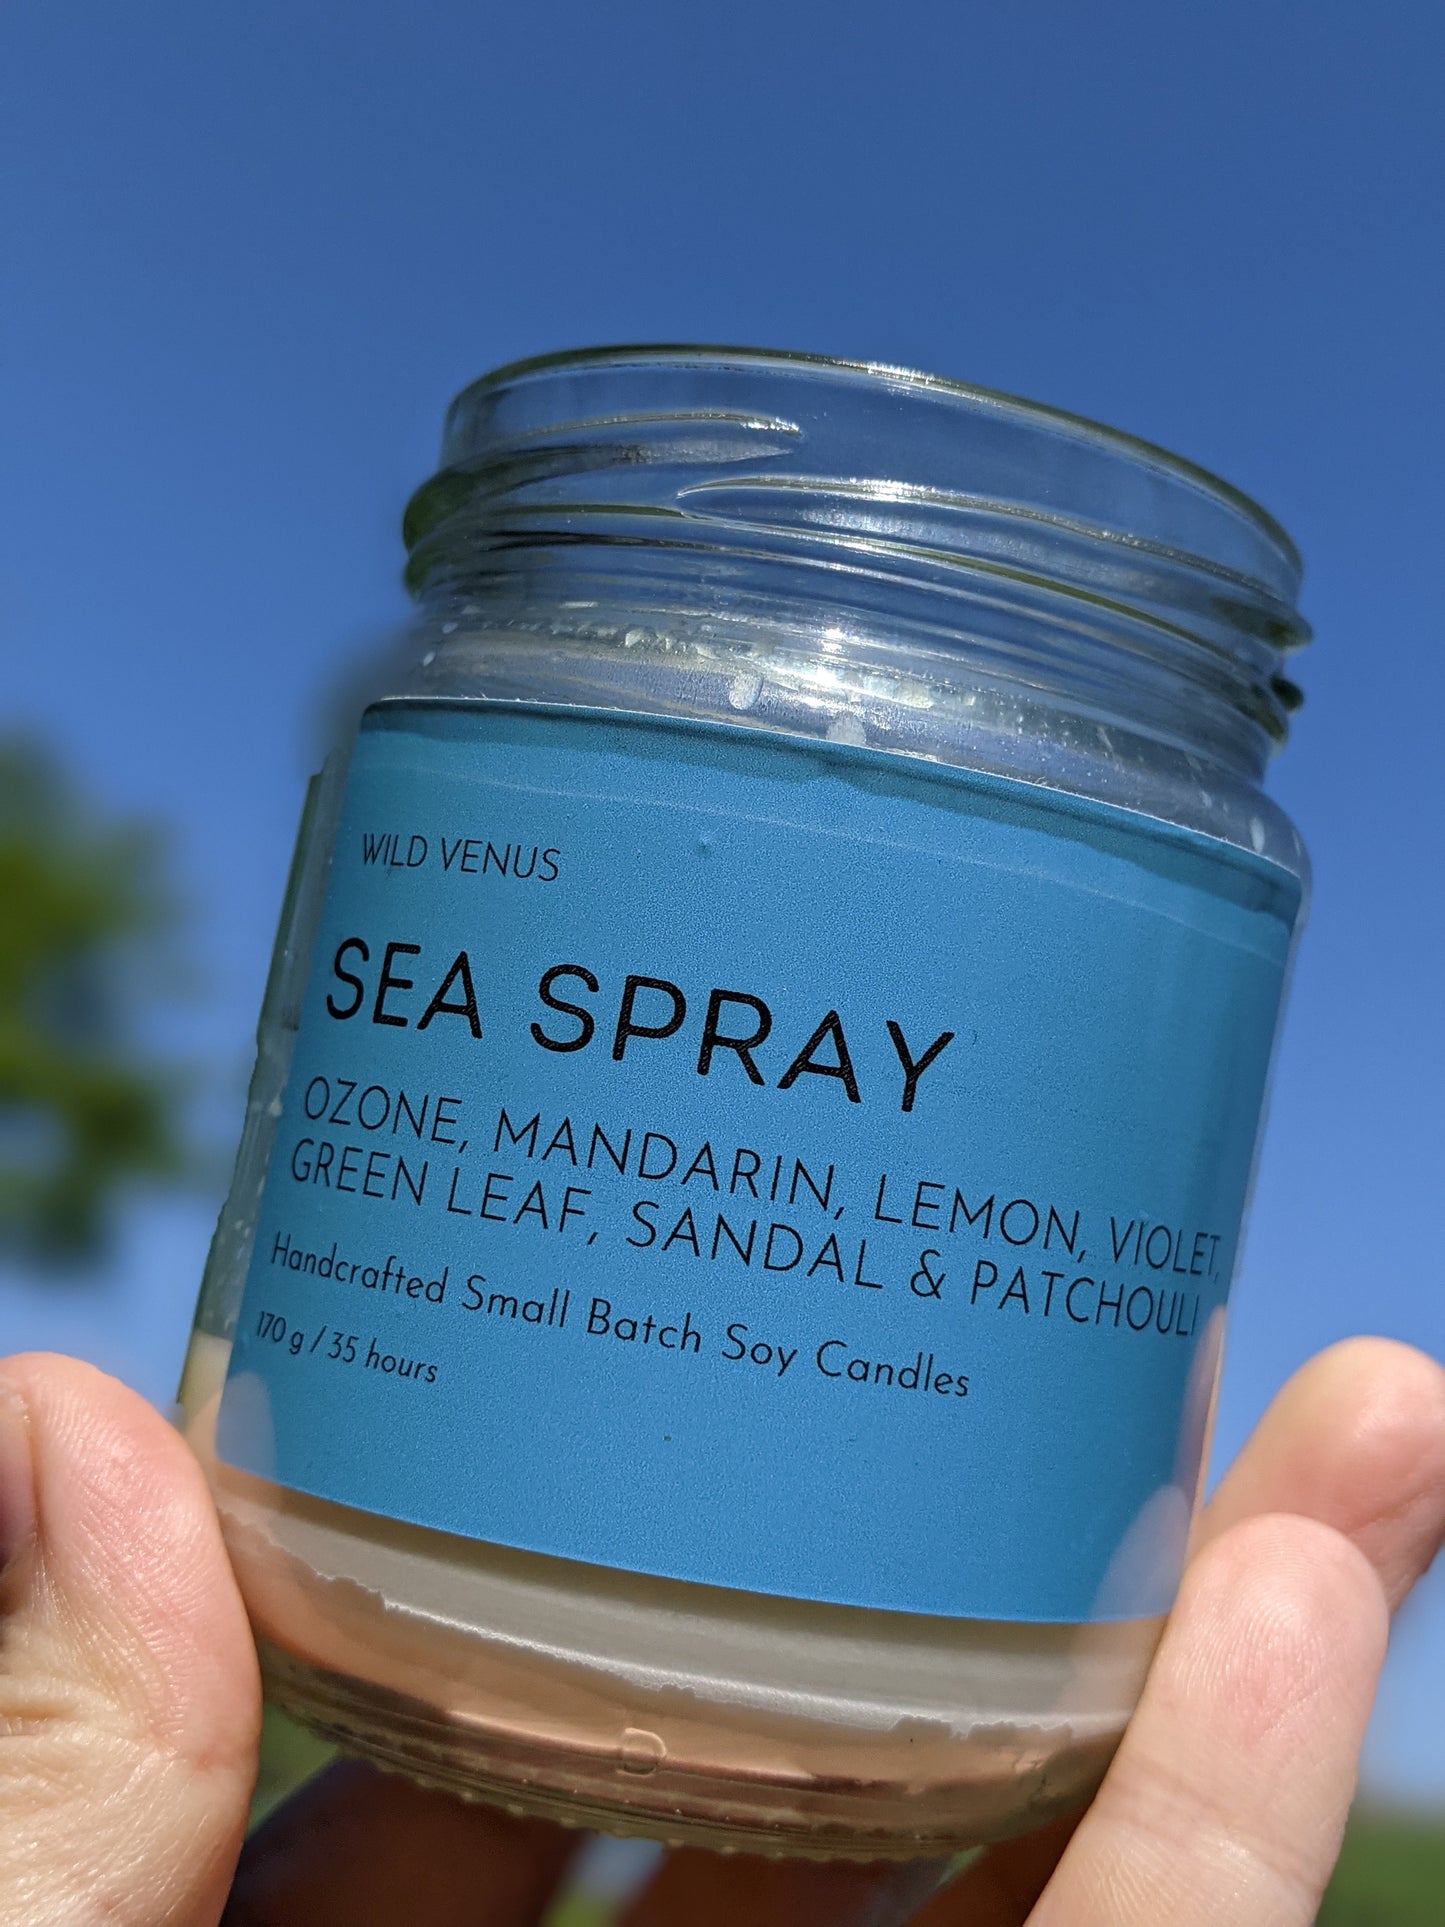 A used Sea Spray scented candles held up against a very blue sky.